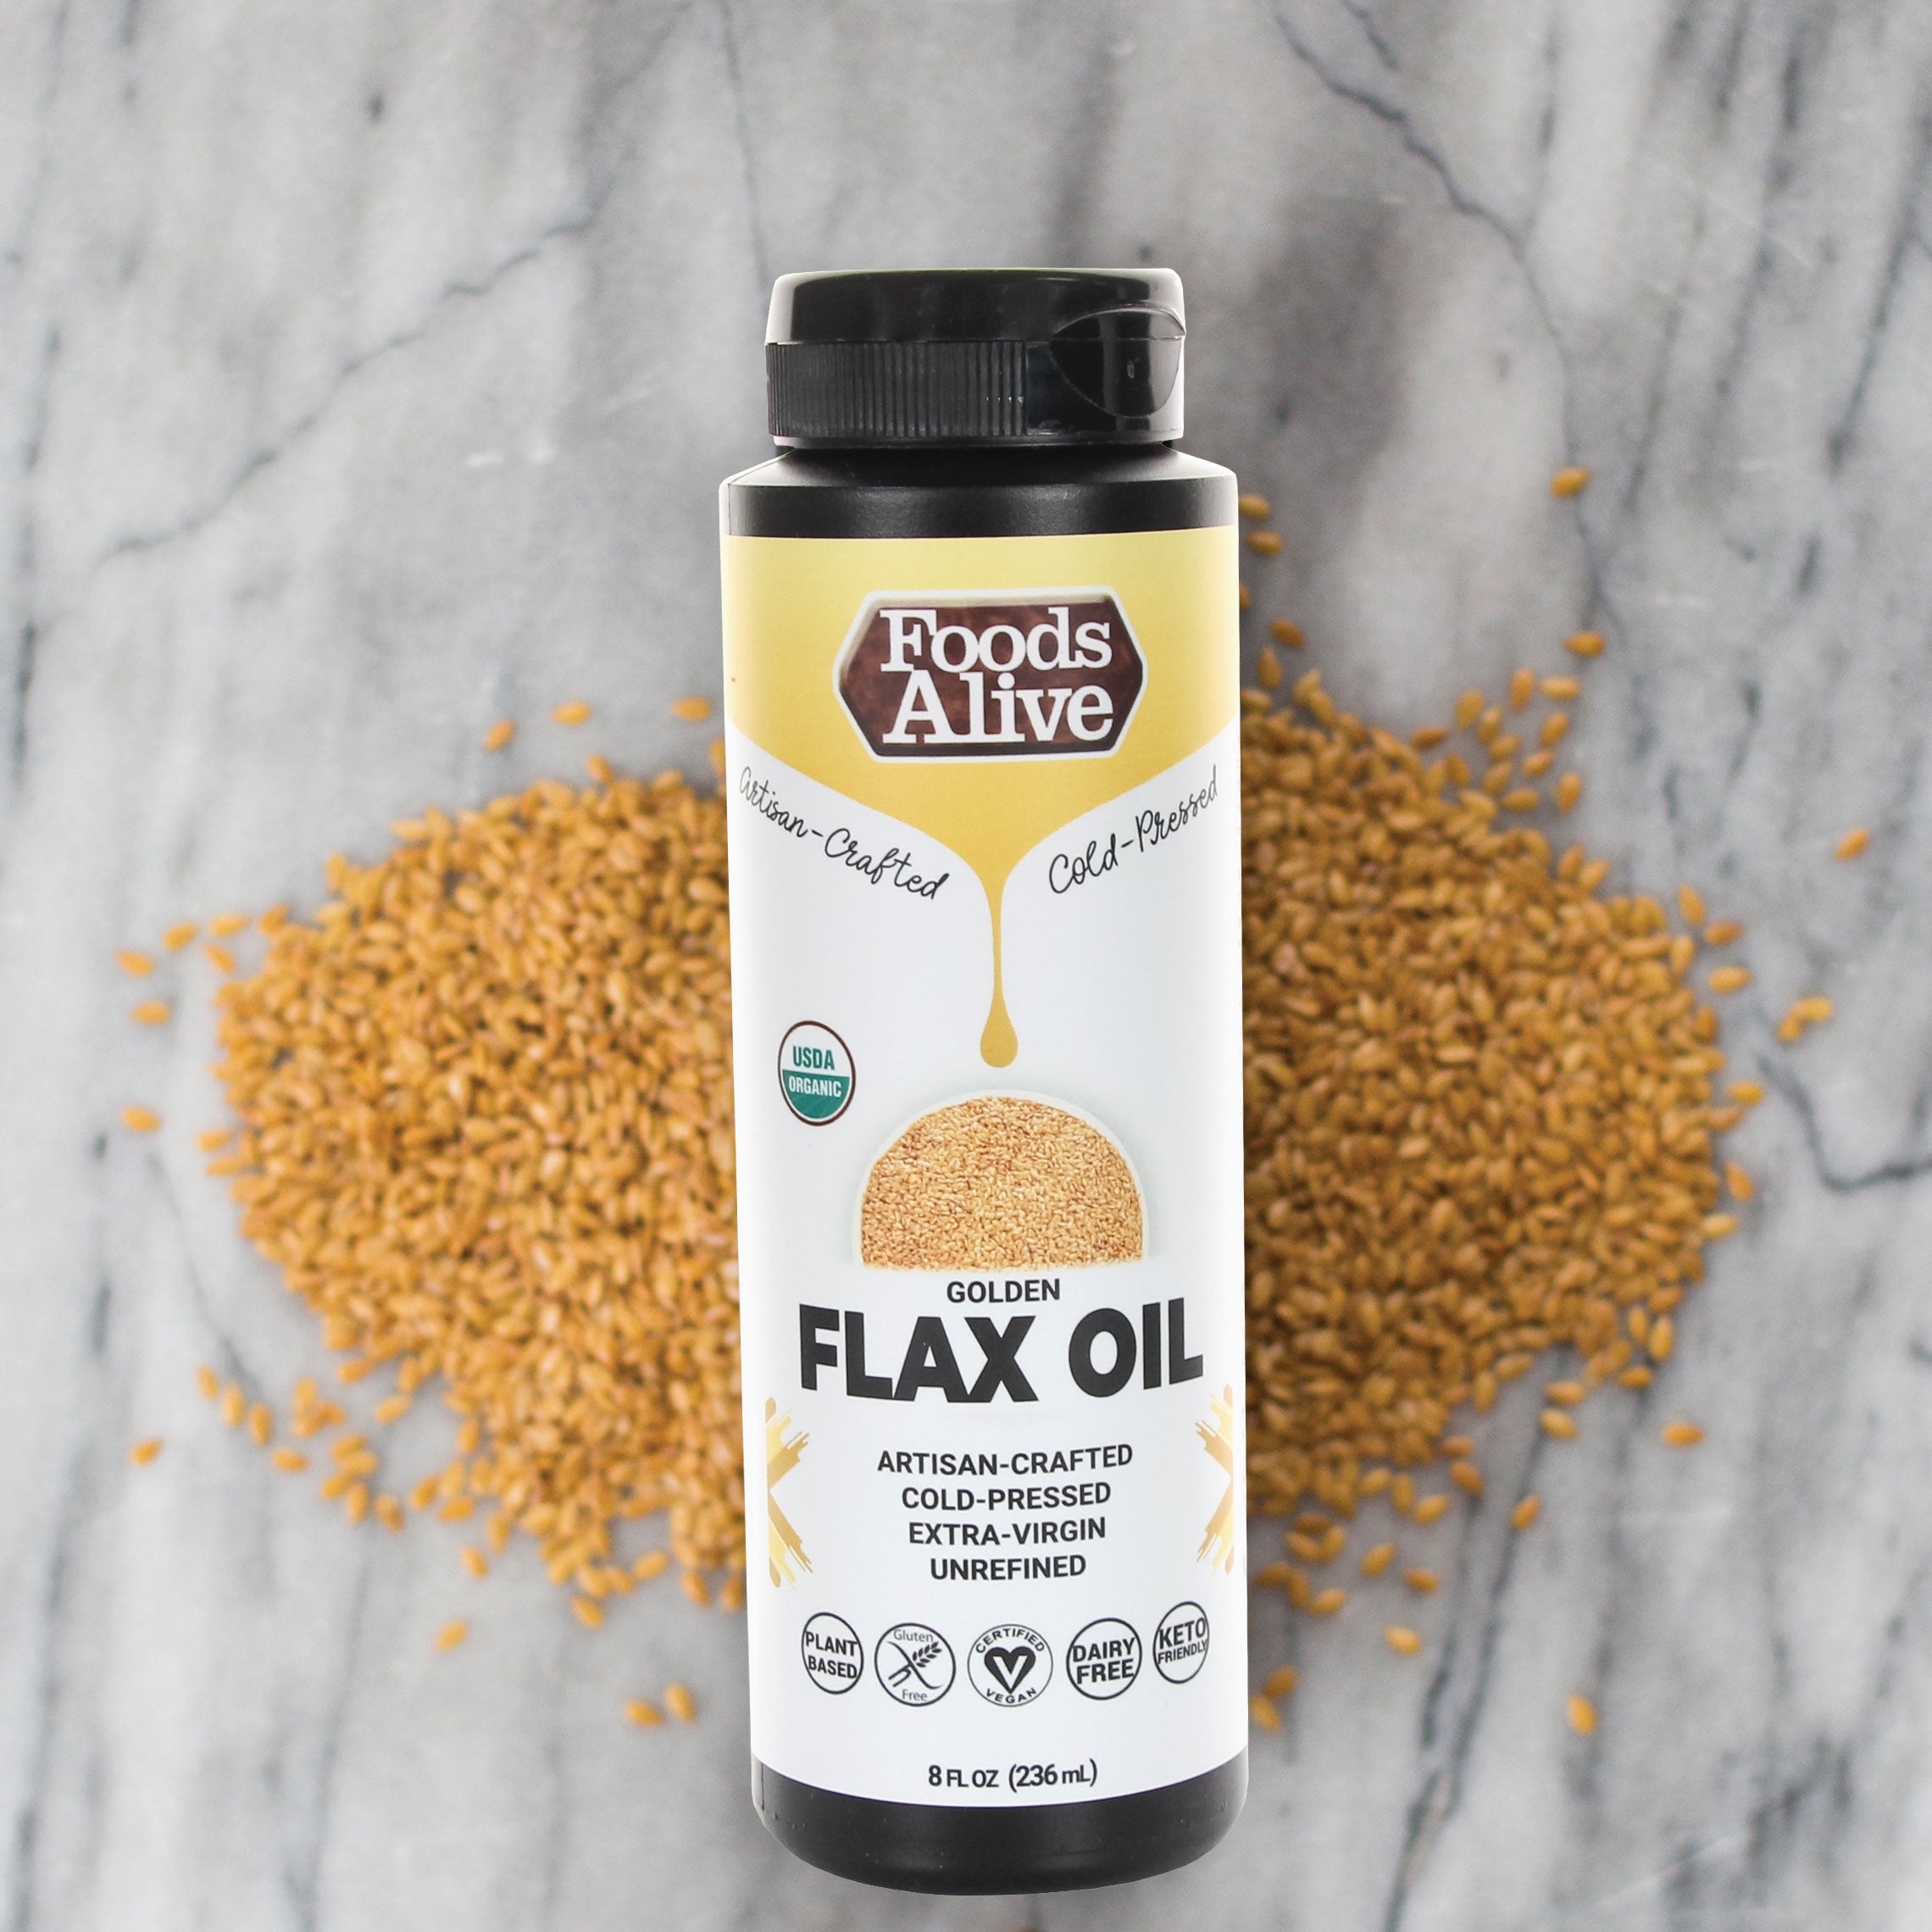 Foods Alive Organic Artisan Cold-Pressed Gold Flax Oil